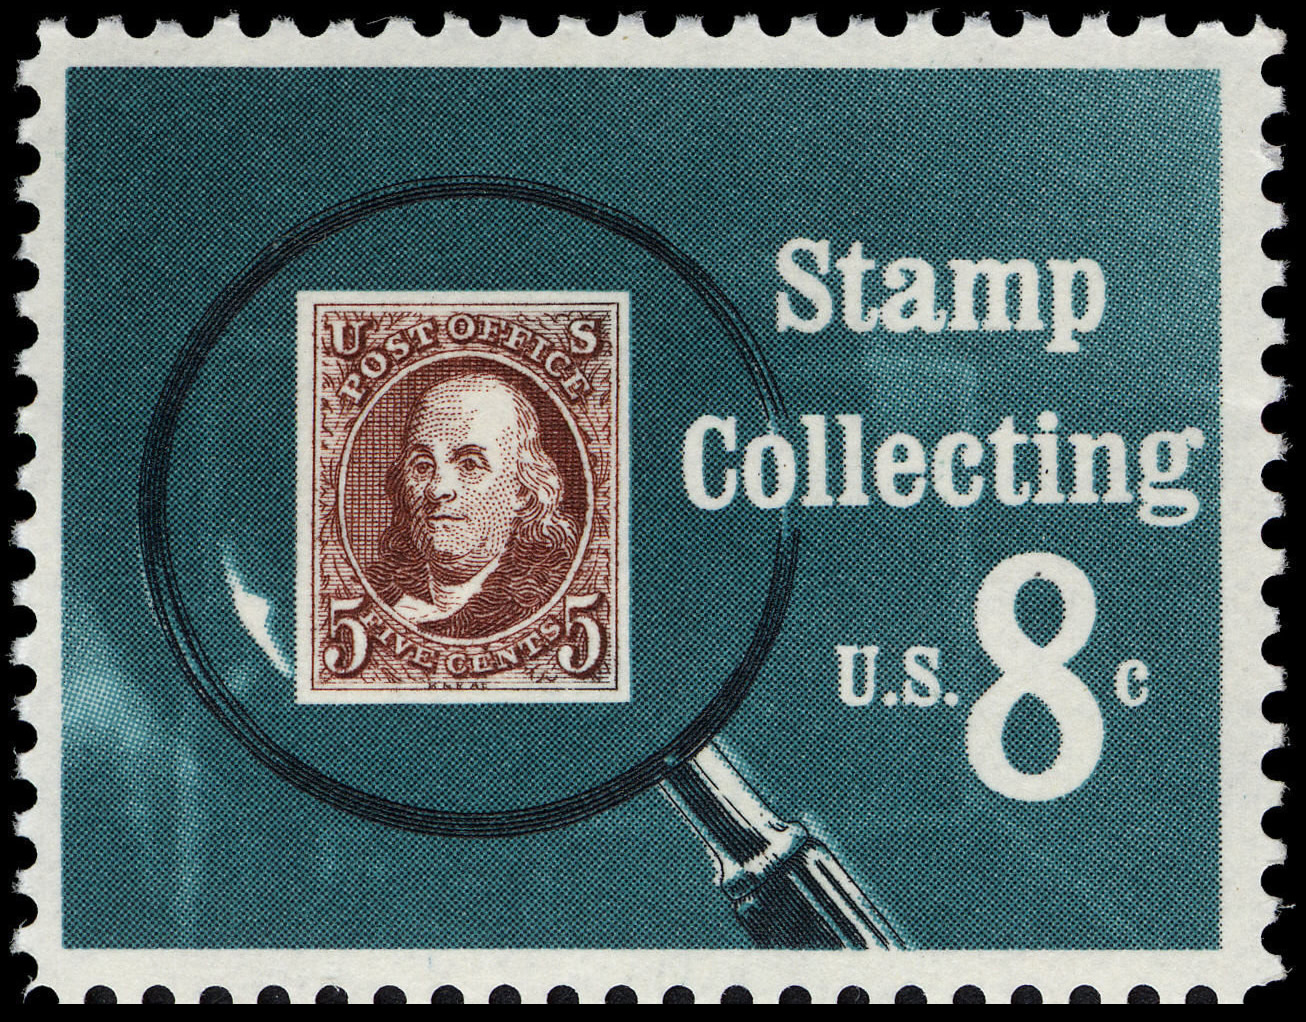 History of America Stamp Collection